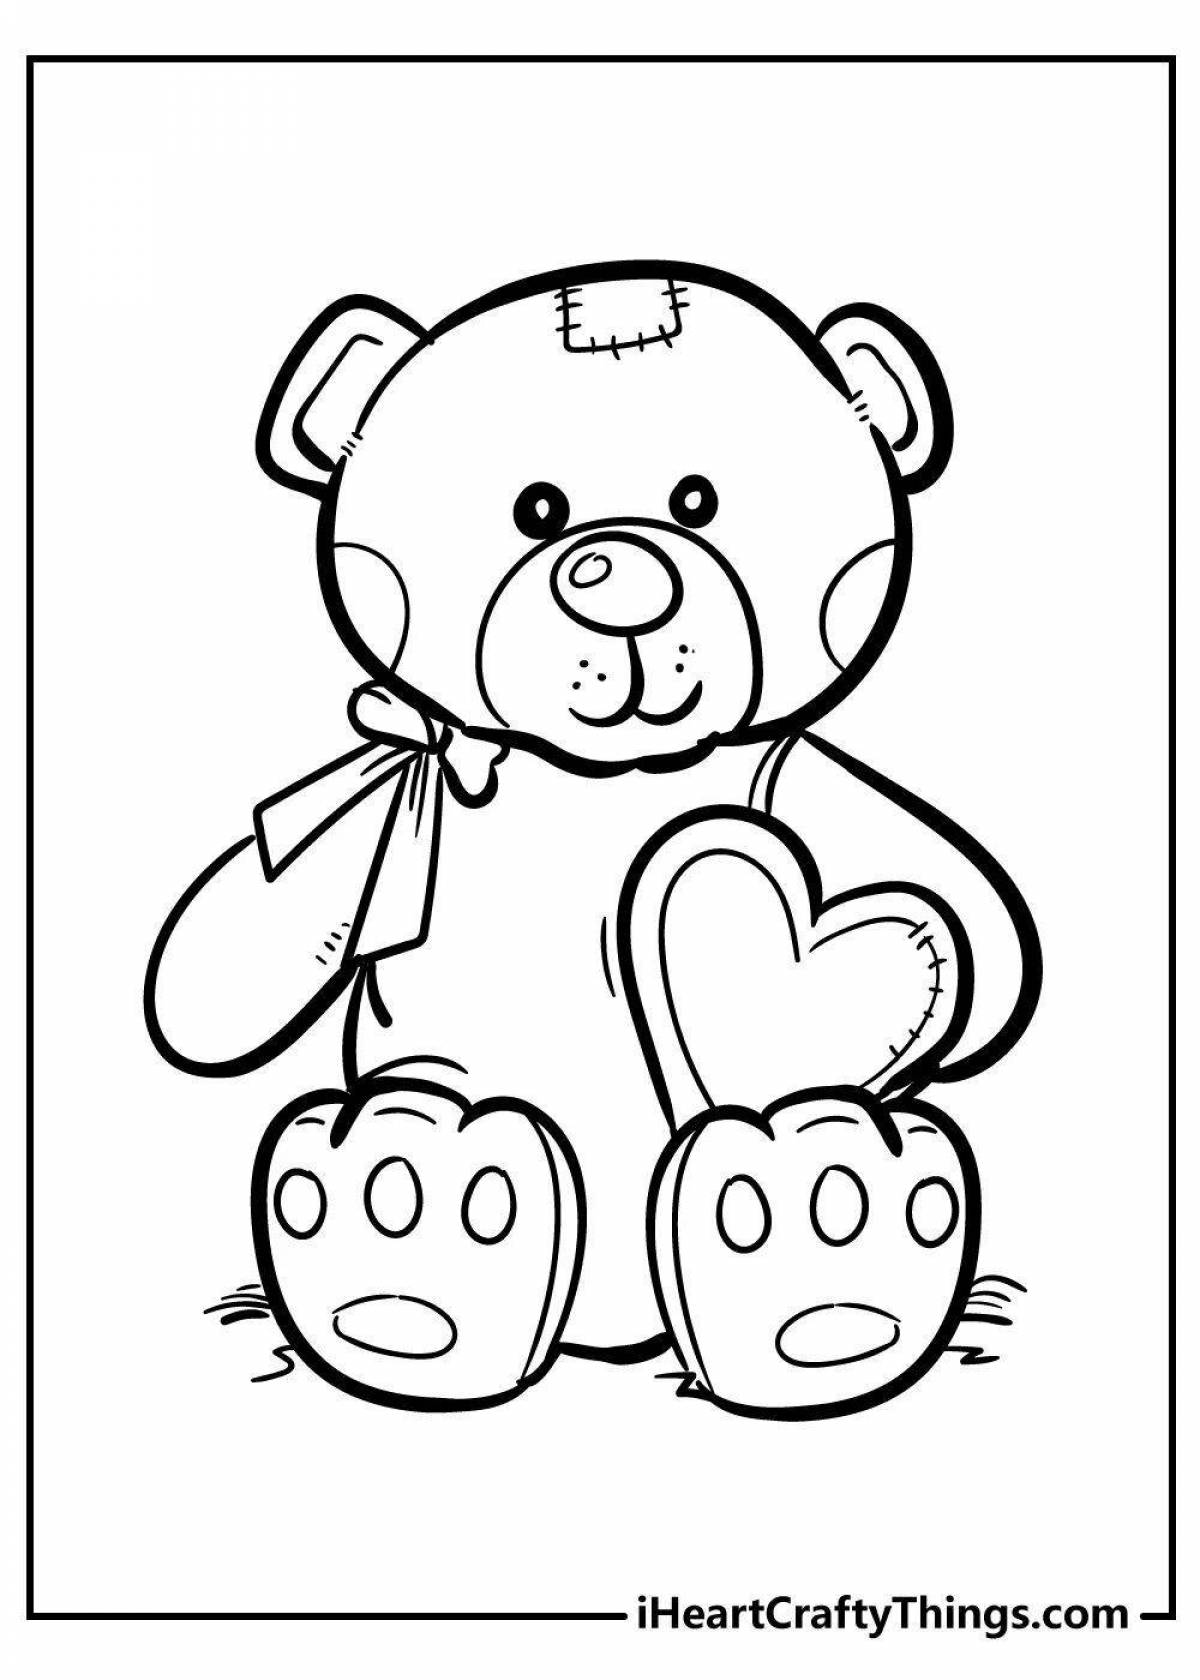 Live coloring bear for children 5-6 years old